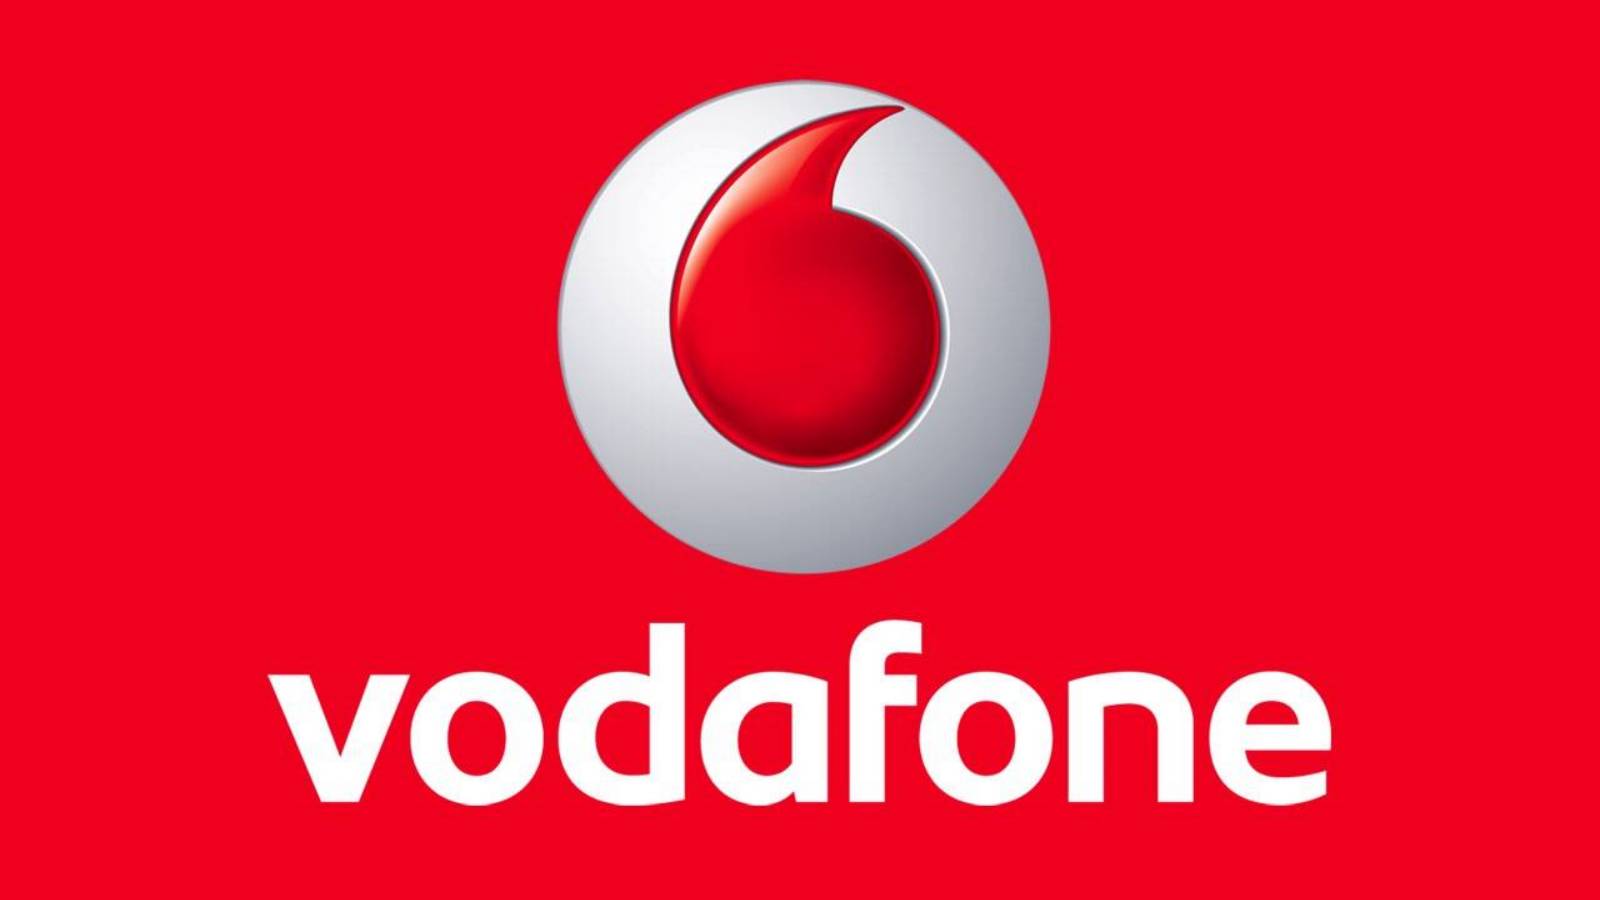 Vodafone Official FREE MILLIONS of Romanian Customers